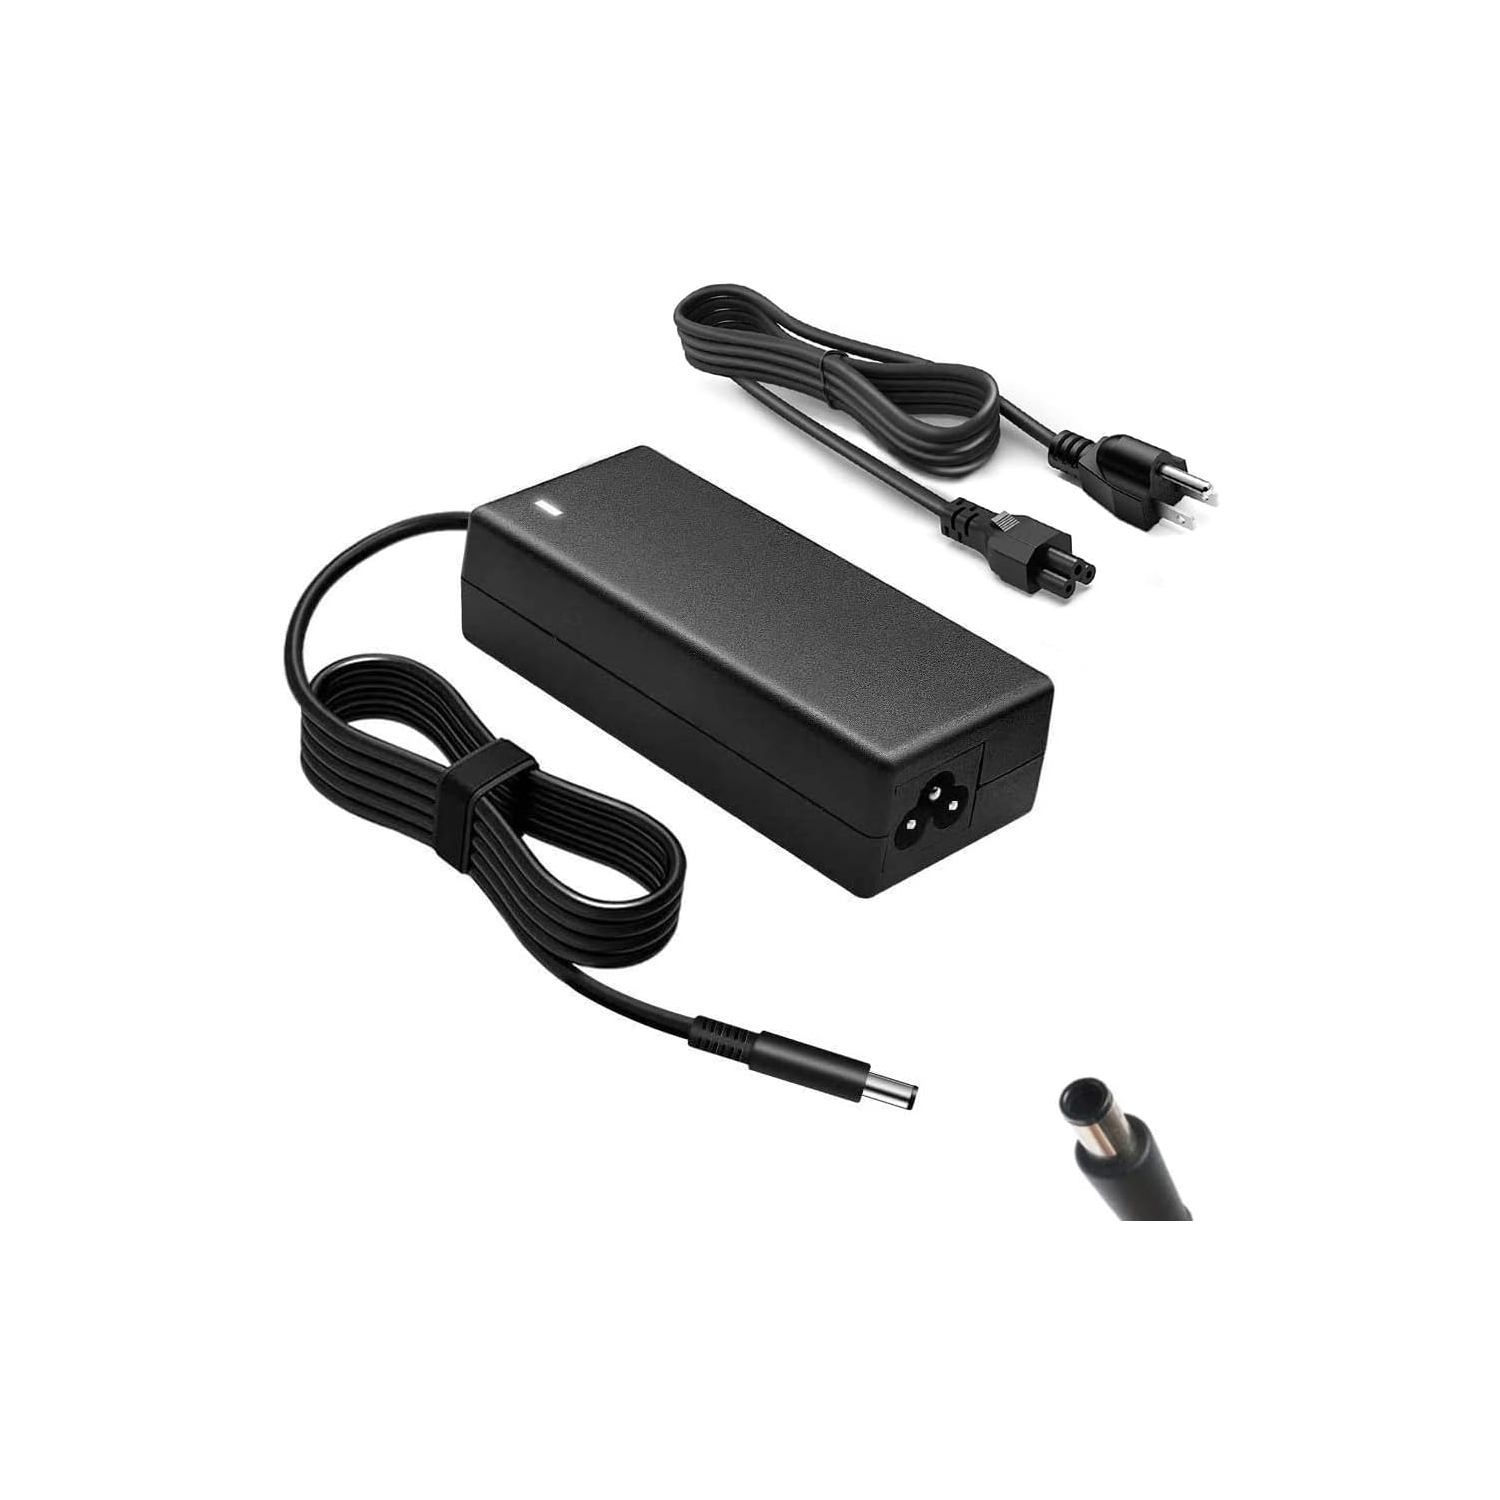 65W Adapter Laptop Charger for Dell Inspiron 11-3000 15-5000 13-5000 13-7000 14-3000 14-5000 15-3000 15-7000 17-5000